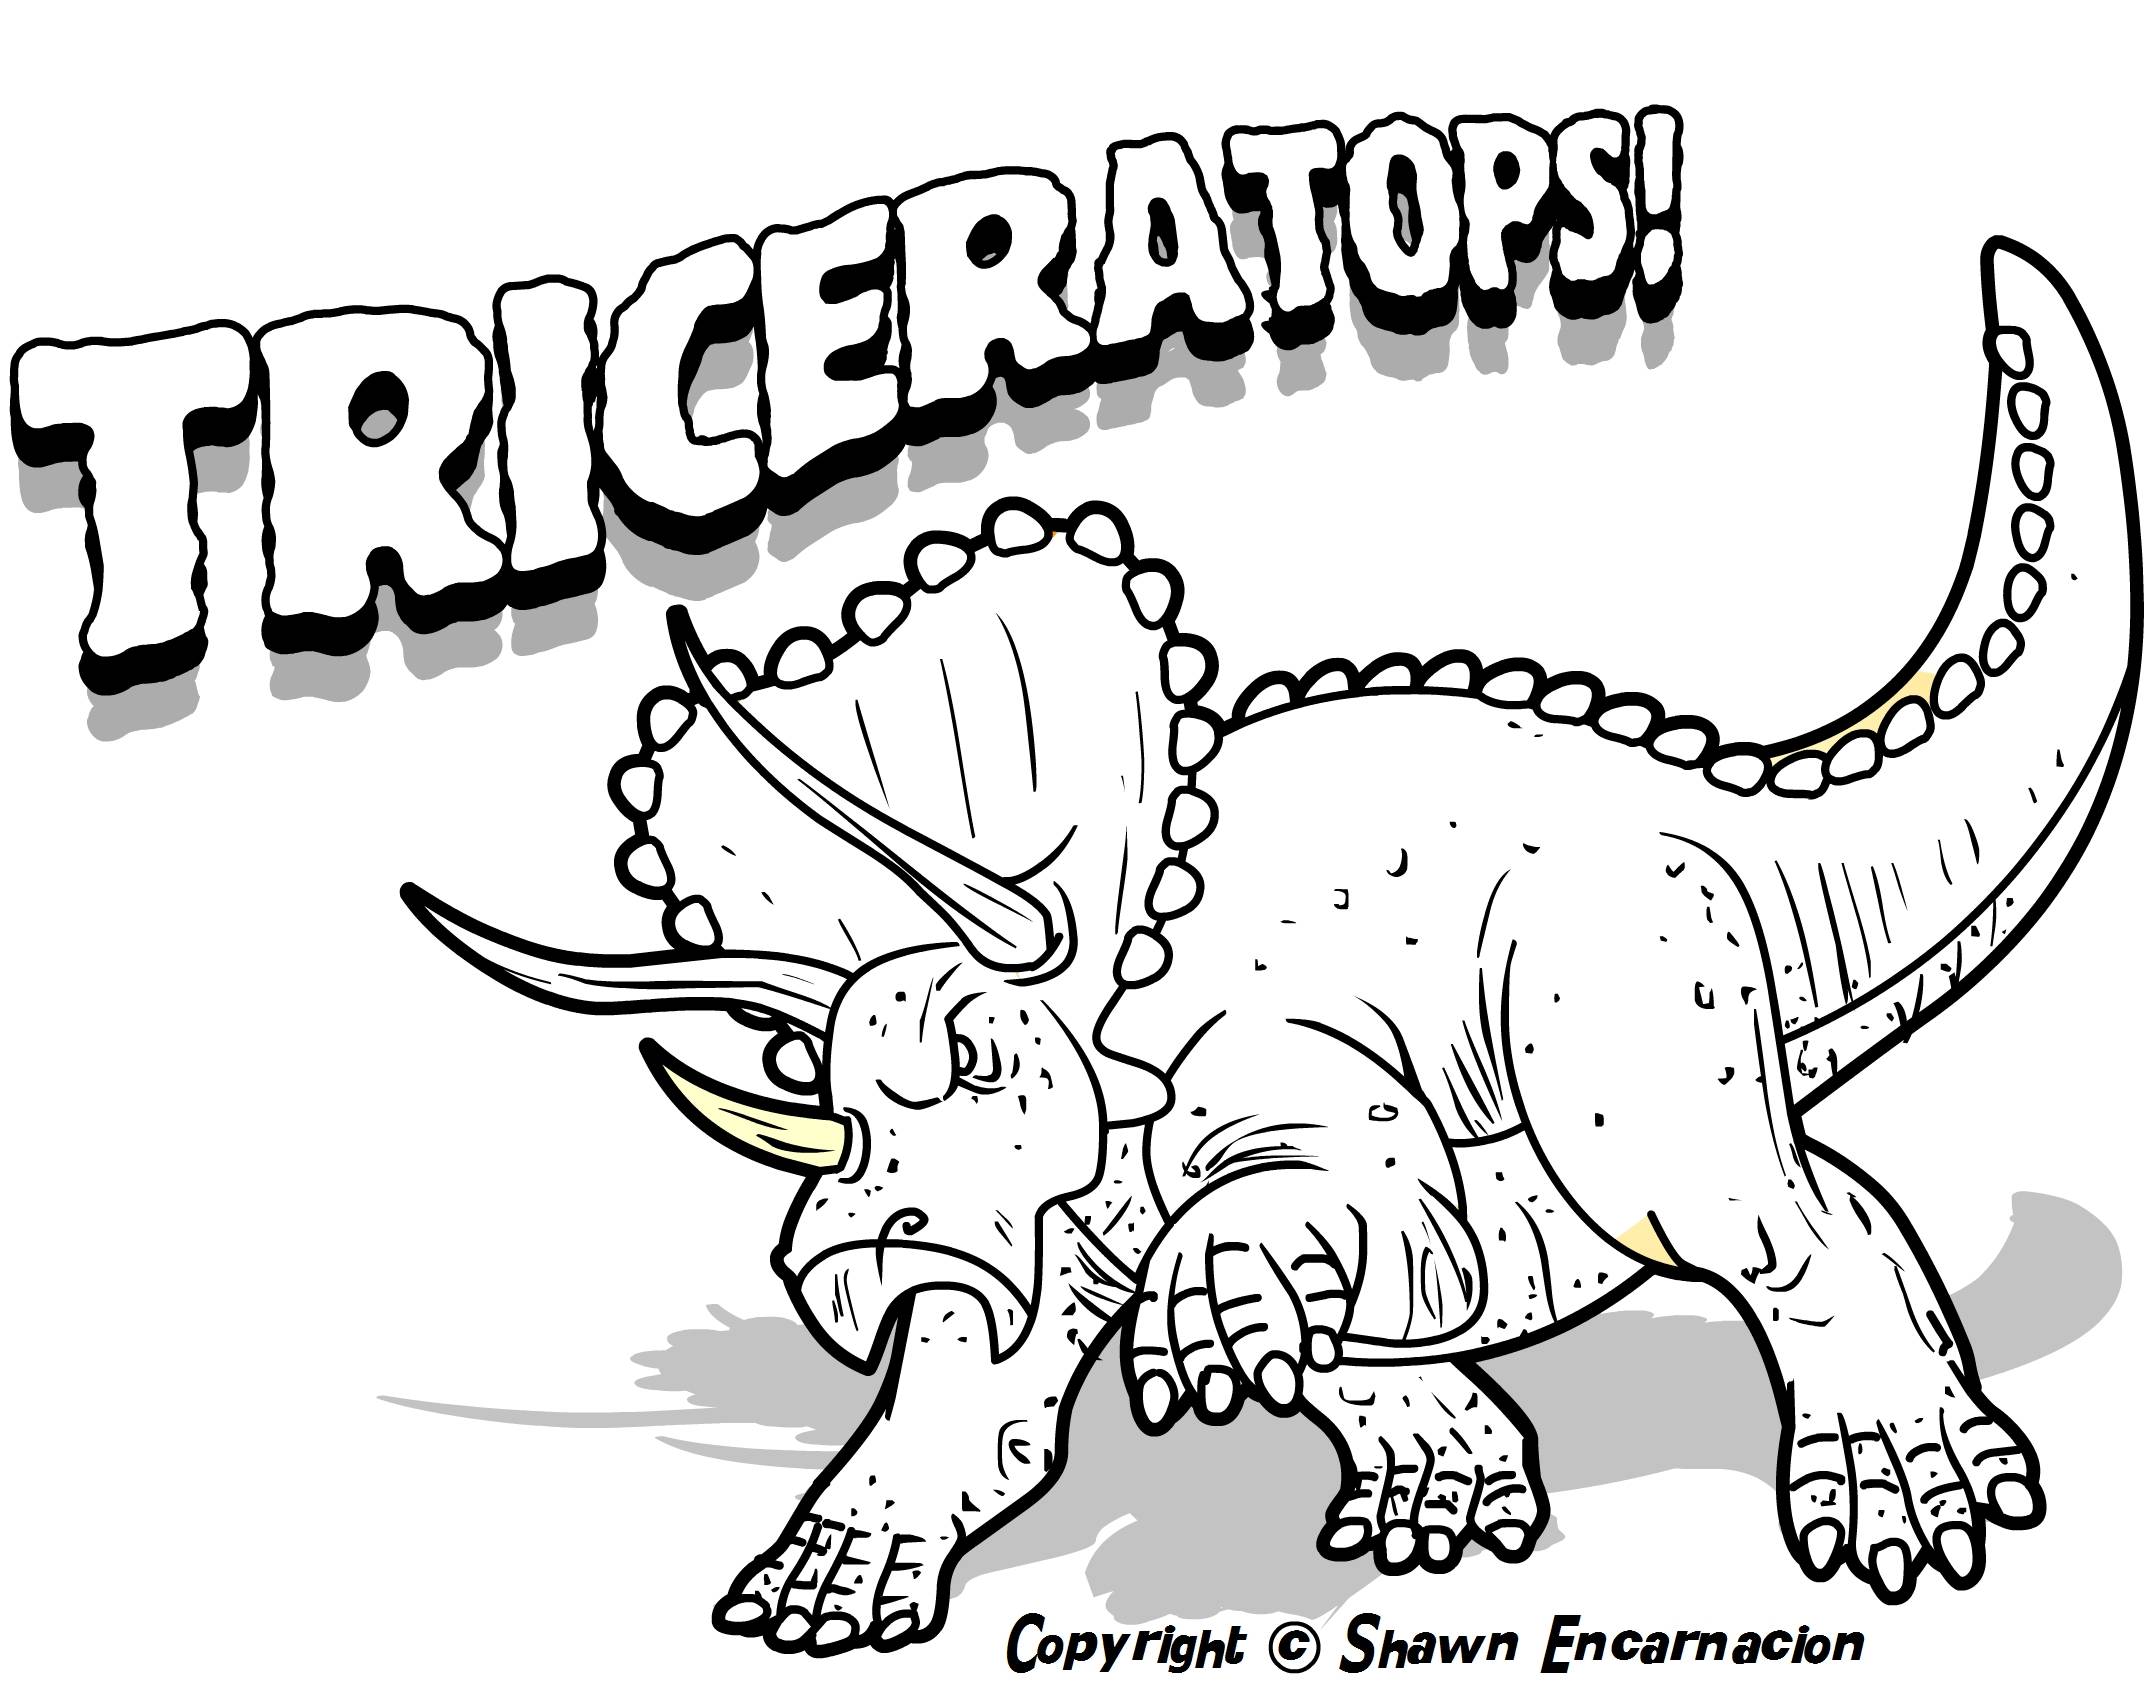 adult dino dan coloring pages dino dan dinosaur coloring pages ...